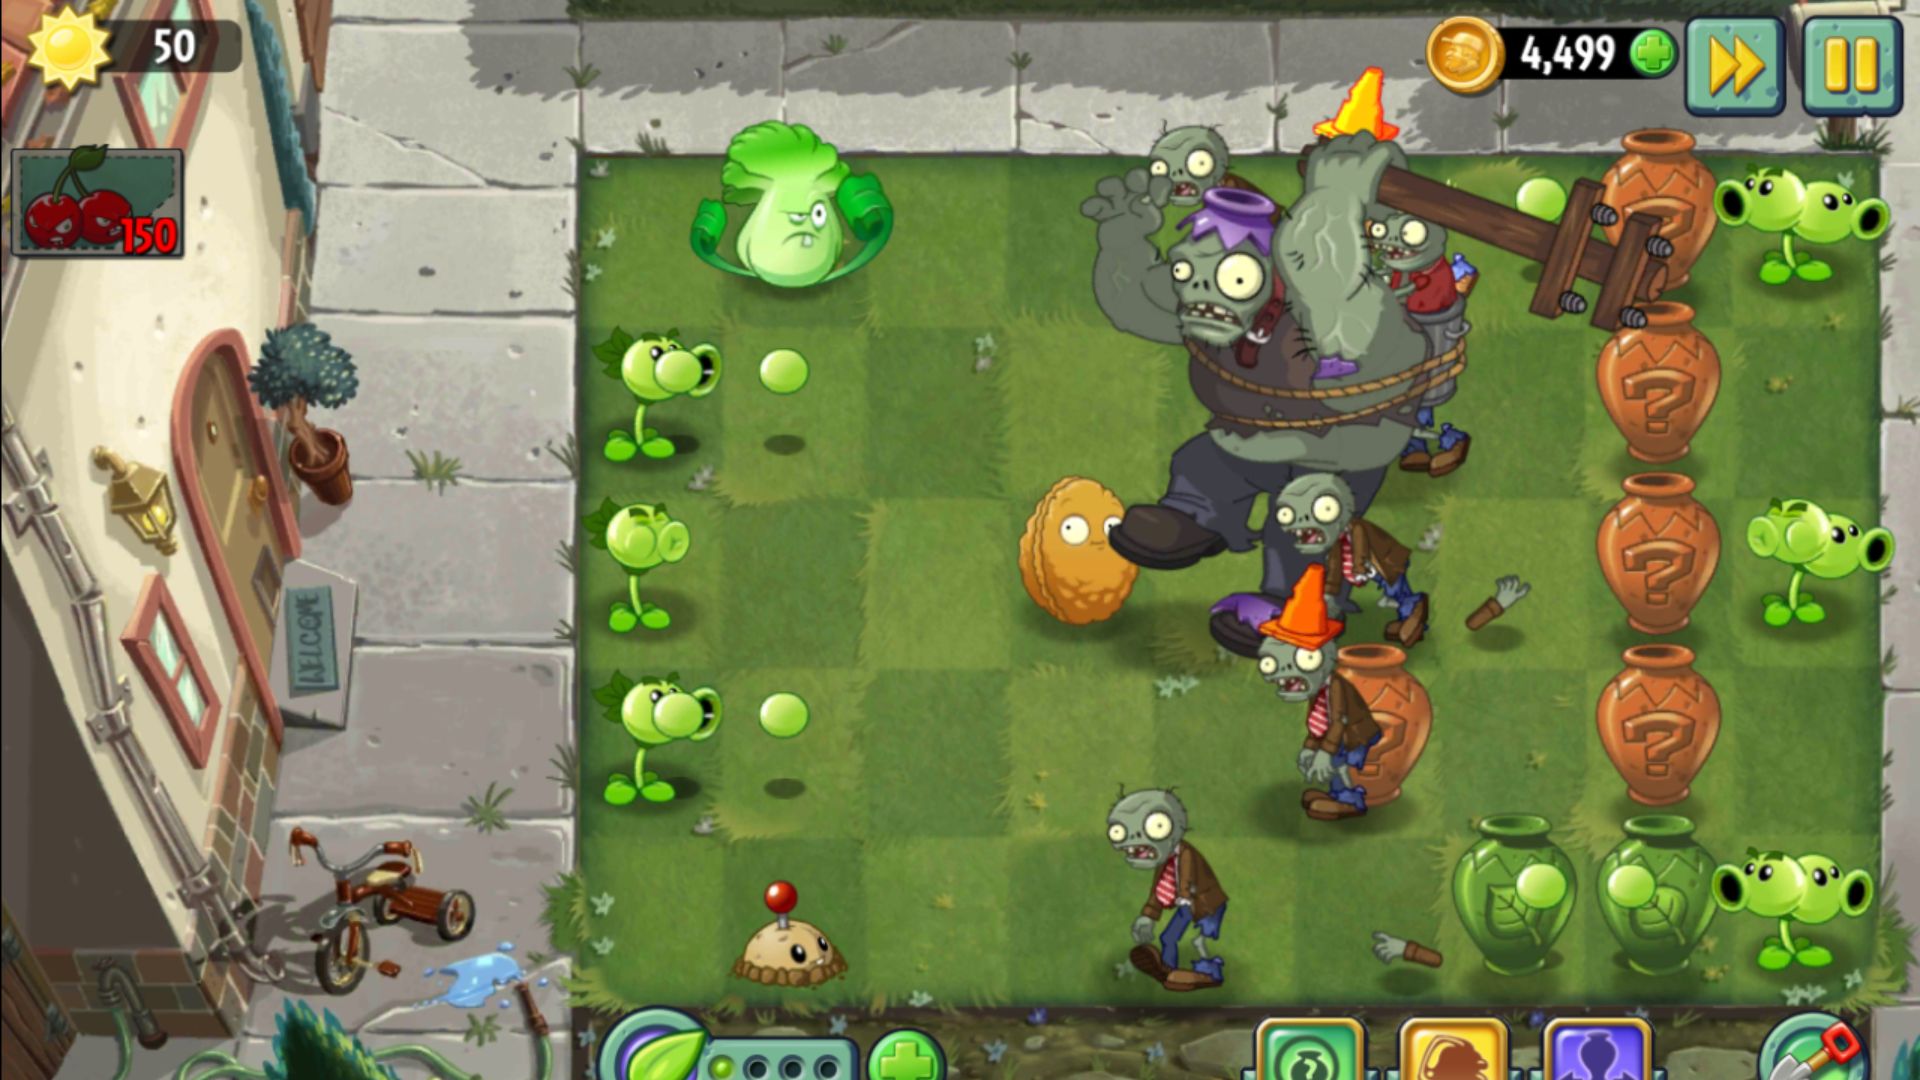 Plants vs Zombies games on Switch and mobile